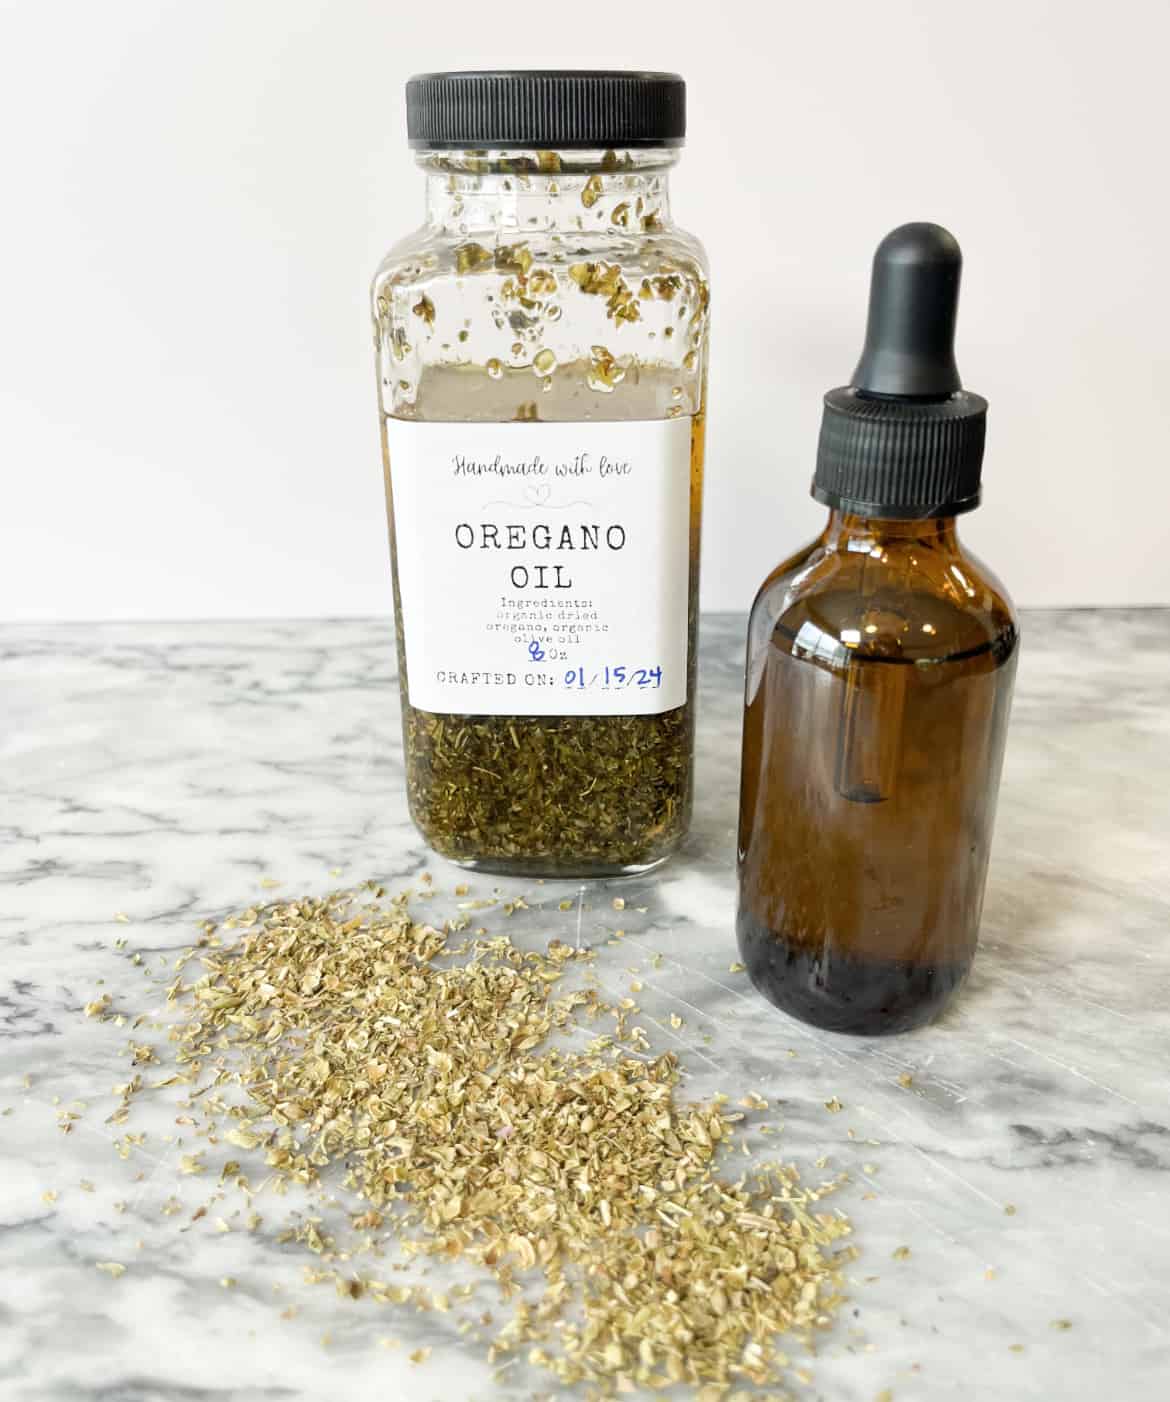 Benefits of Oregano Oil and How to Make it at Home